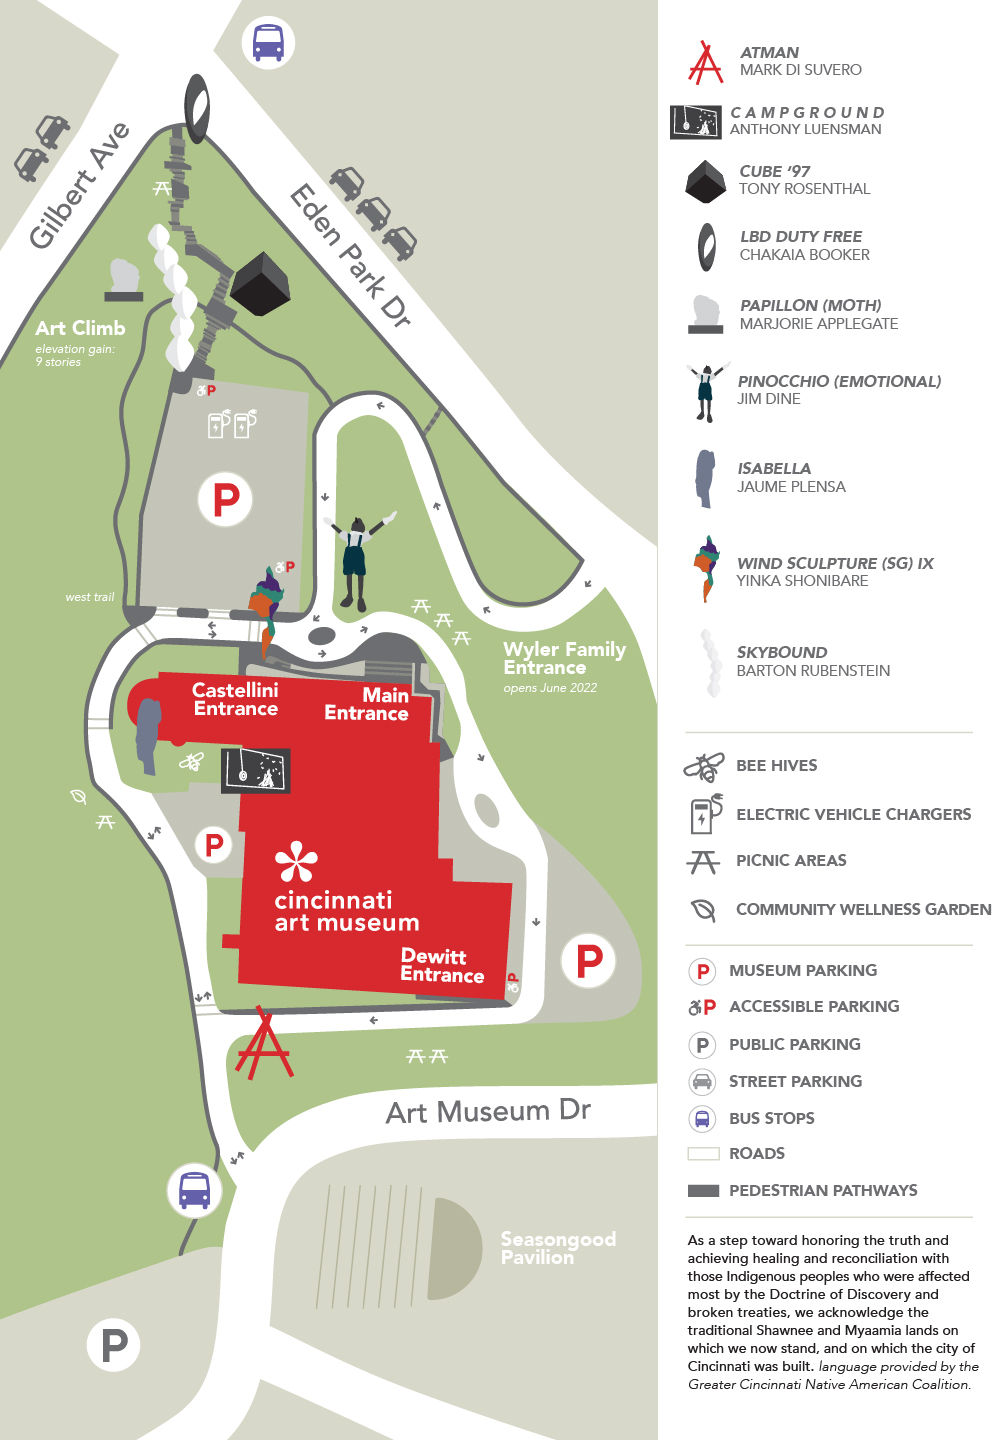 An area map of the museum, featuring entrances and parking details